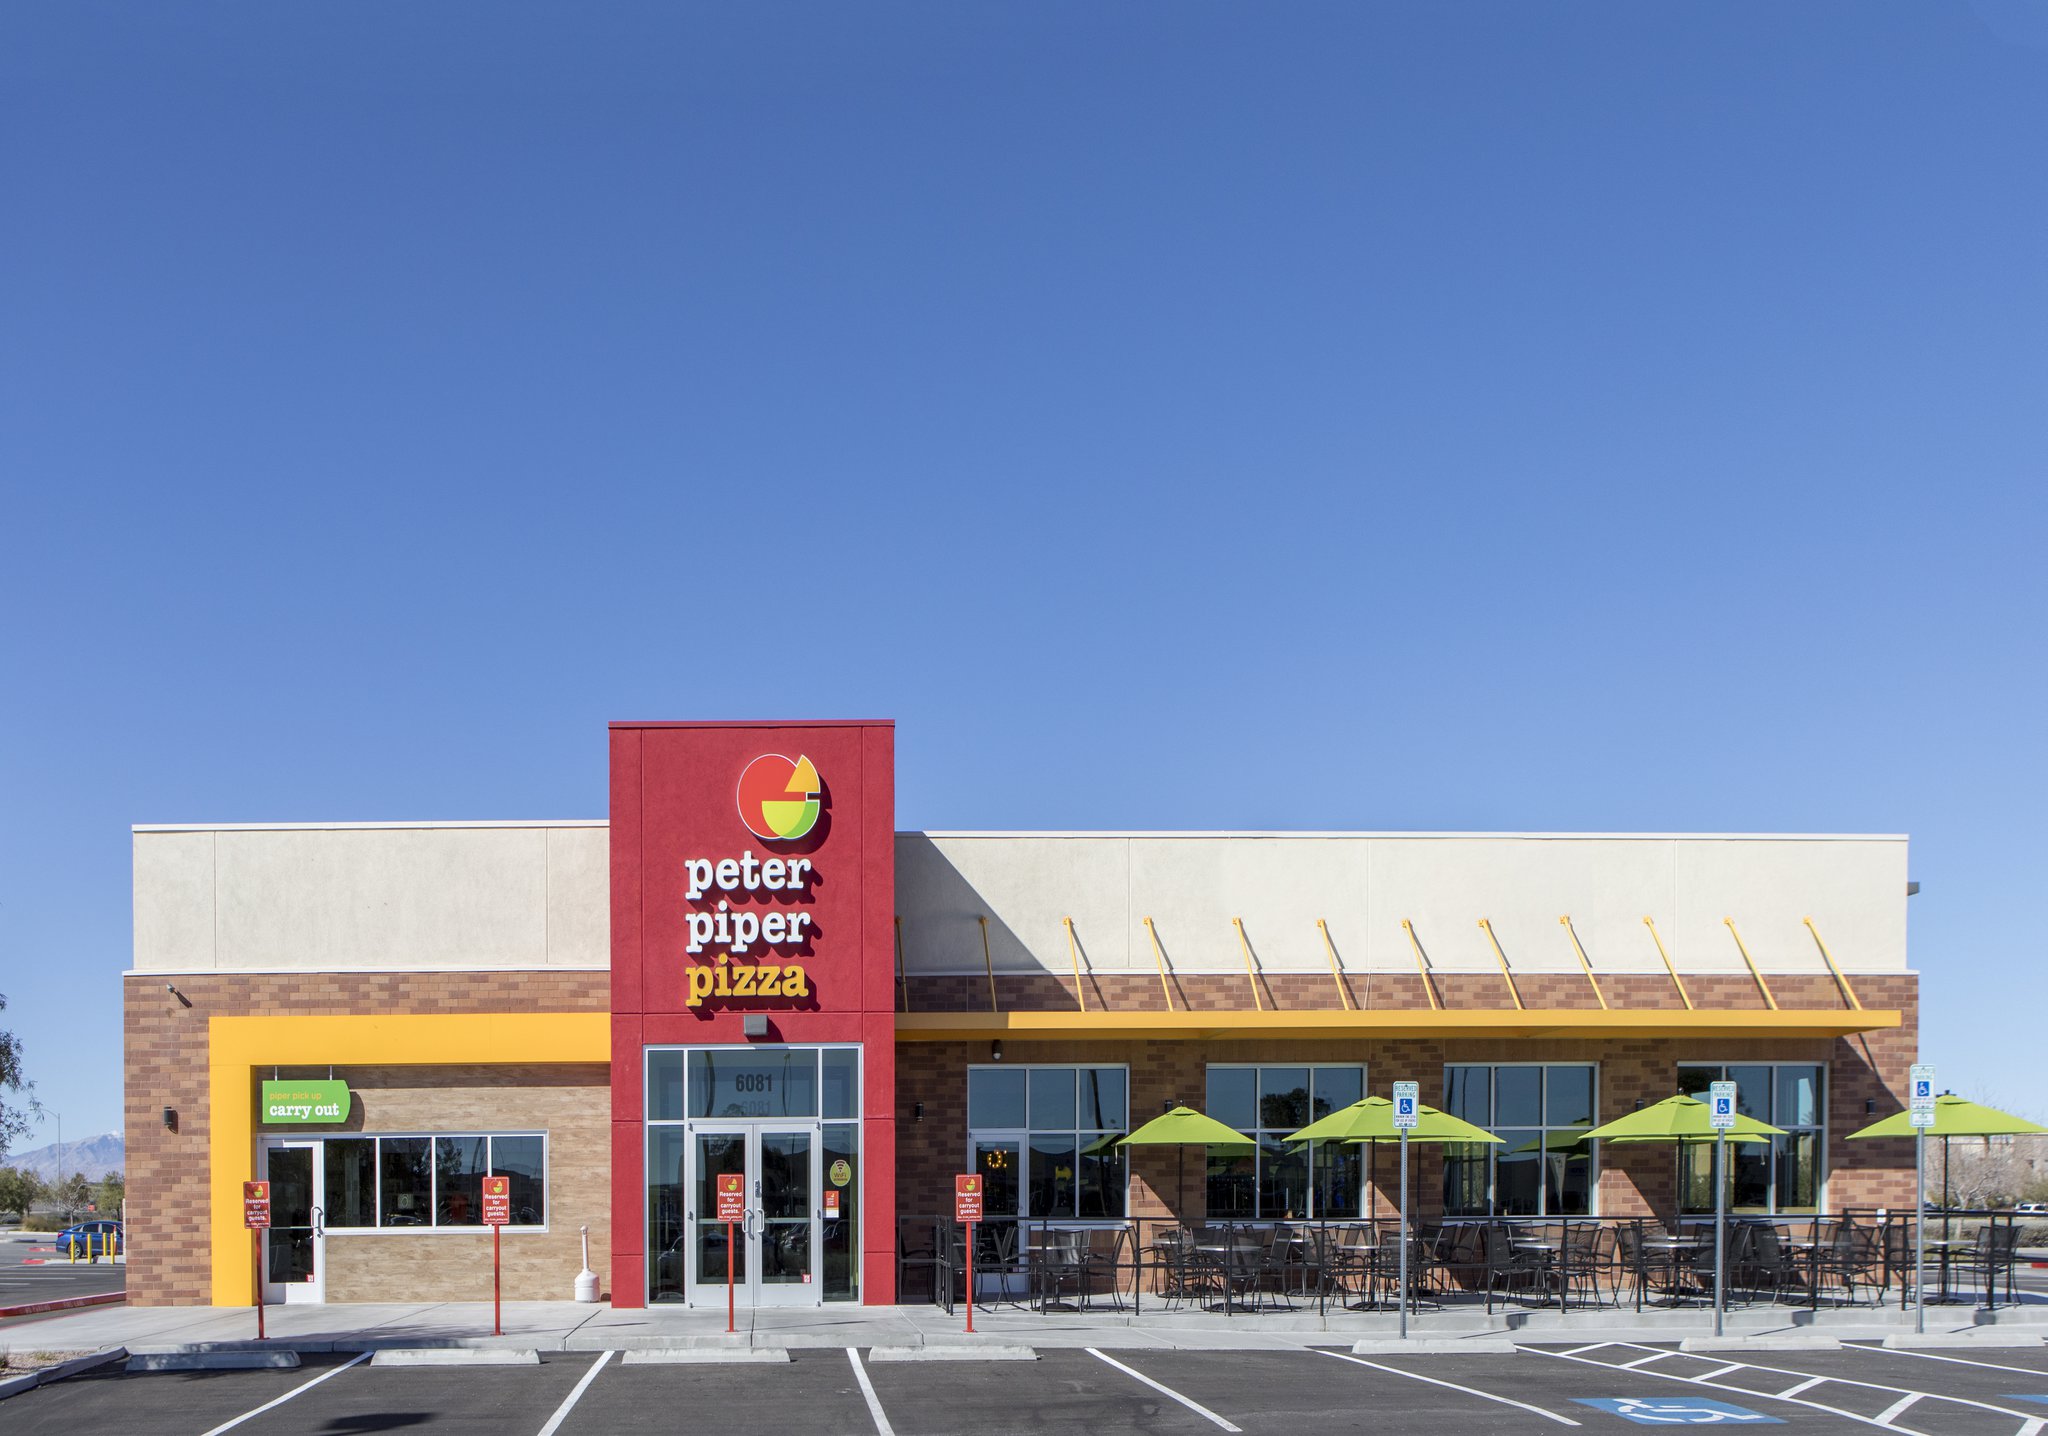 Featured image for “Peter Piper Pizza”